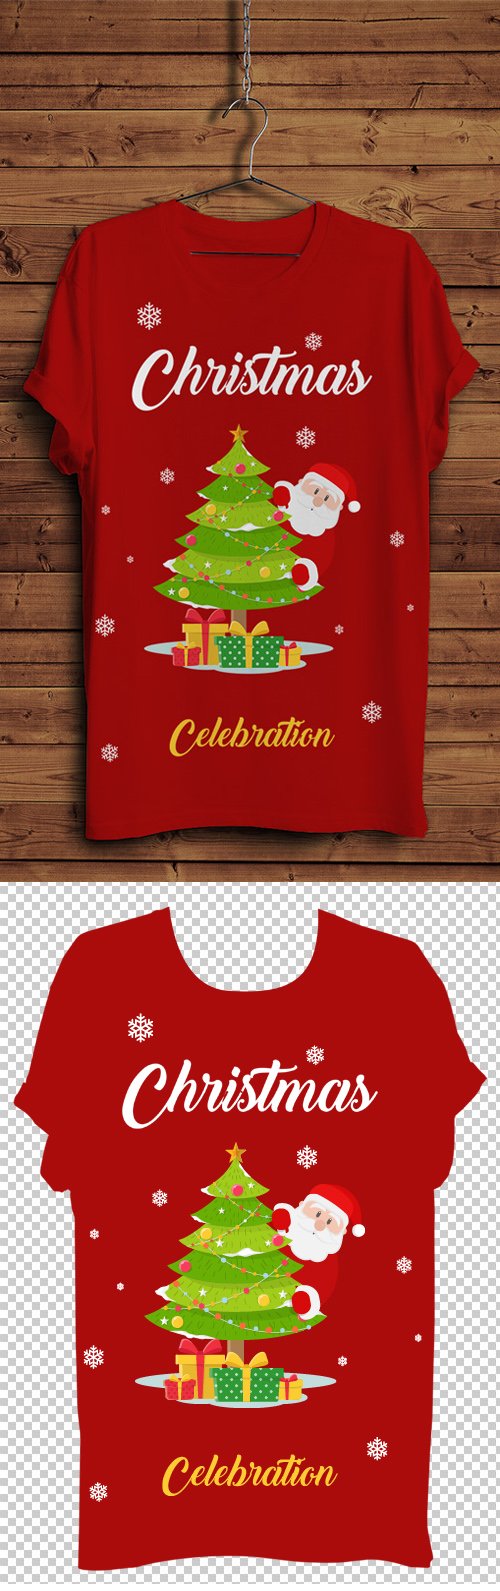 Christmas T-Shirt PSD Mockup with Hanger & Wooden Background